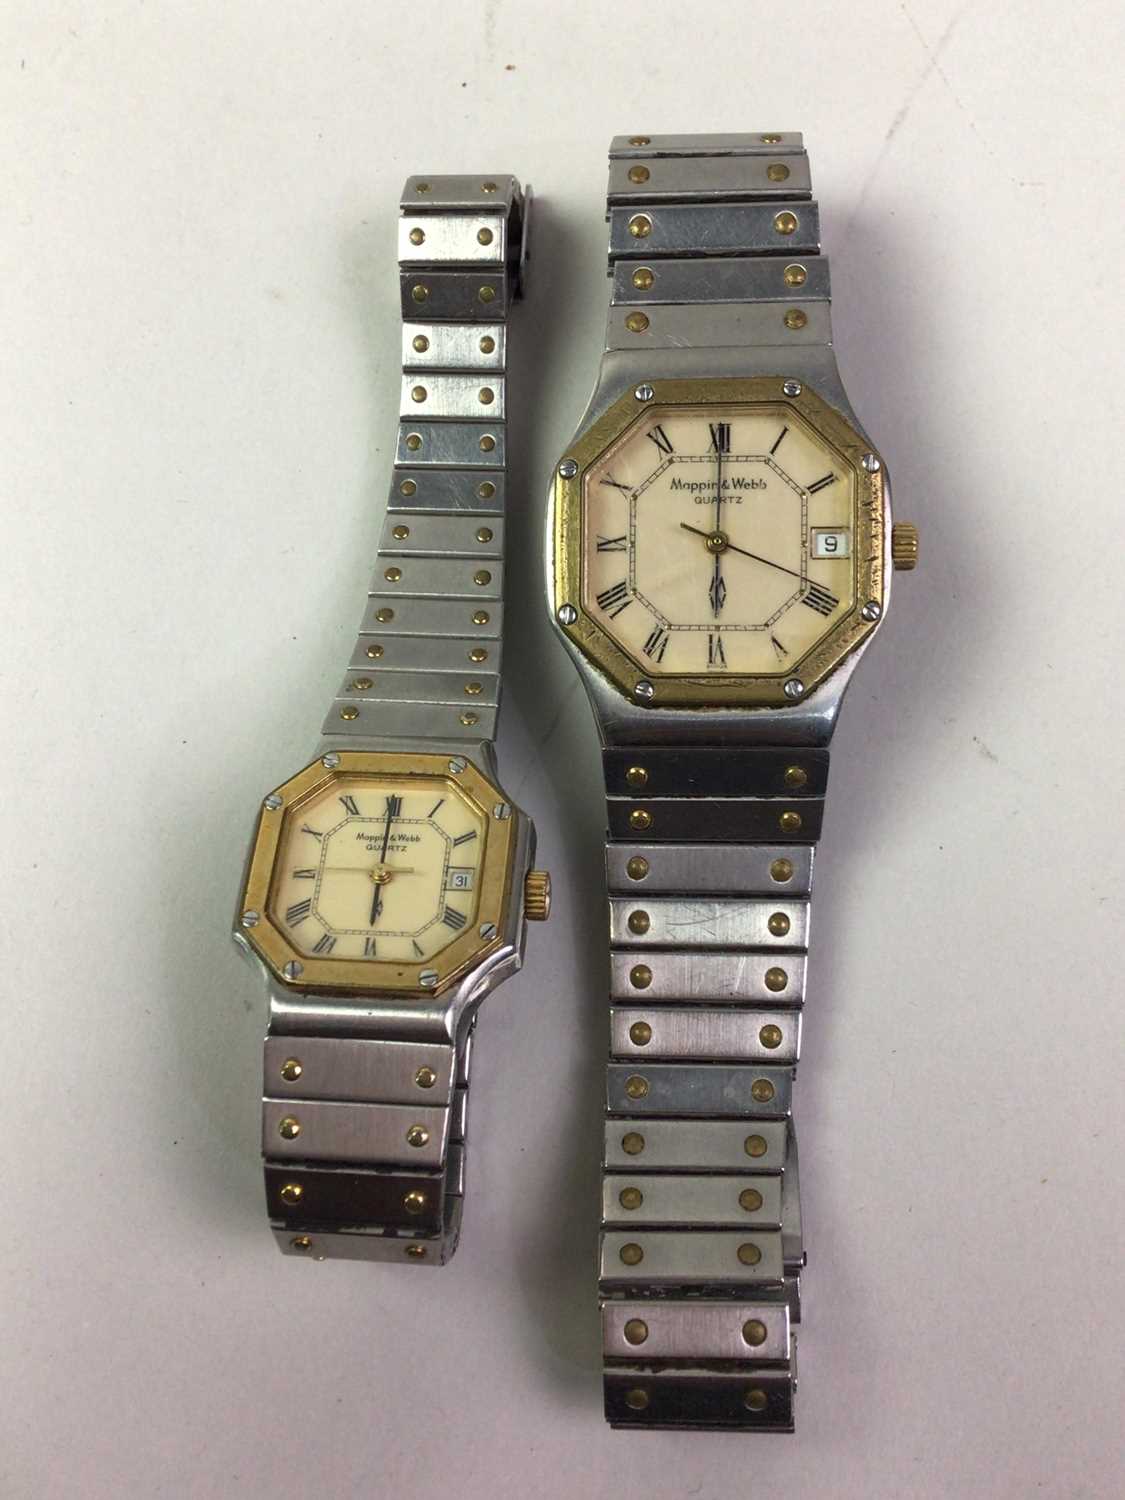 HIS AND HERS MAPPIN AND WEBB QUARTZ WRIST WATCHES, - Image 2 of 2